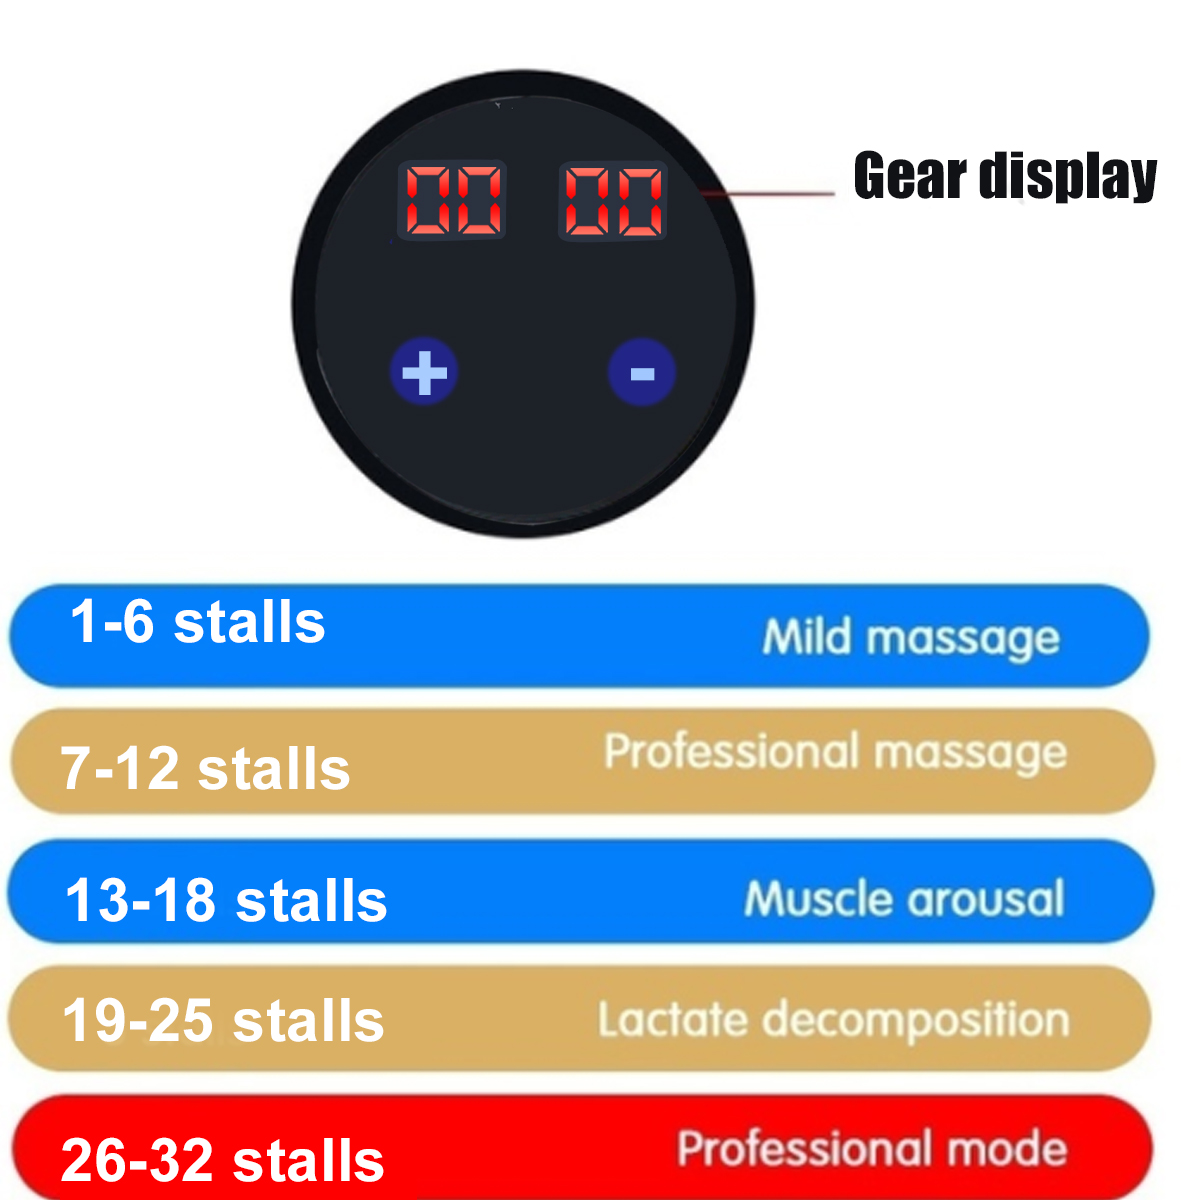 Display-Touch-Screen-Percussion-Massager-4000mAh-32-Levels-Electric-Massager-Deep-Tissue-Massager-fo-1704975-8